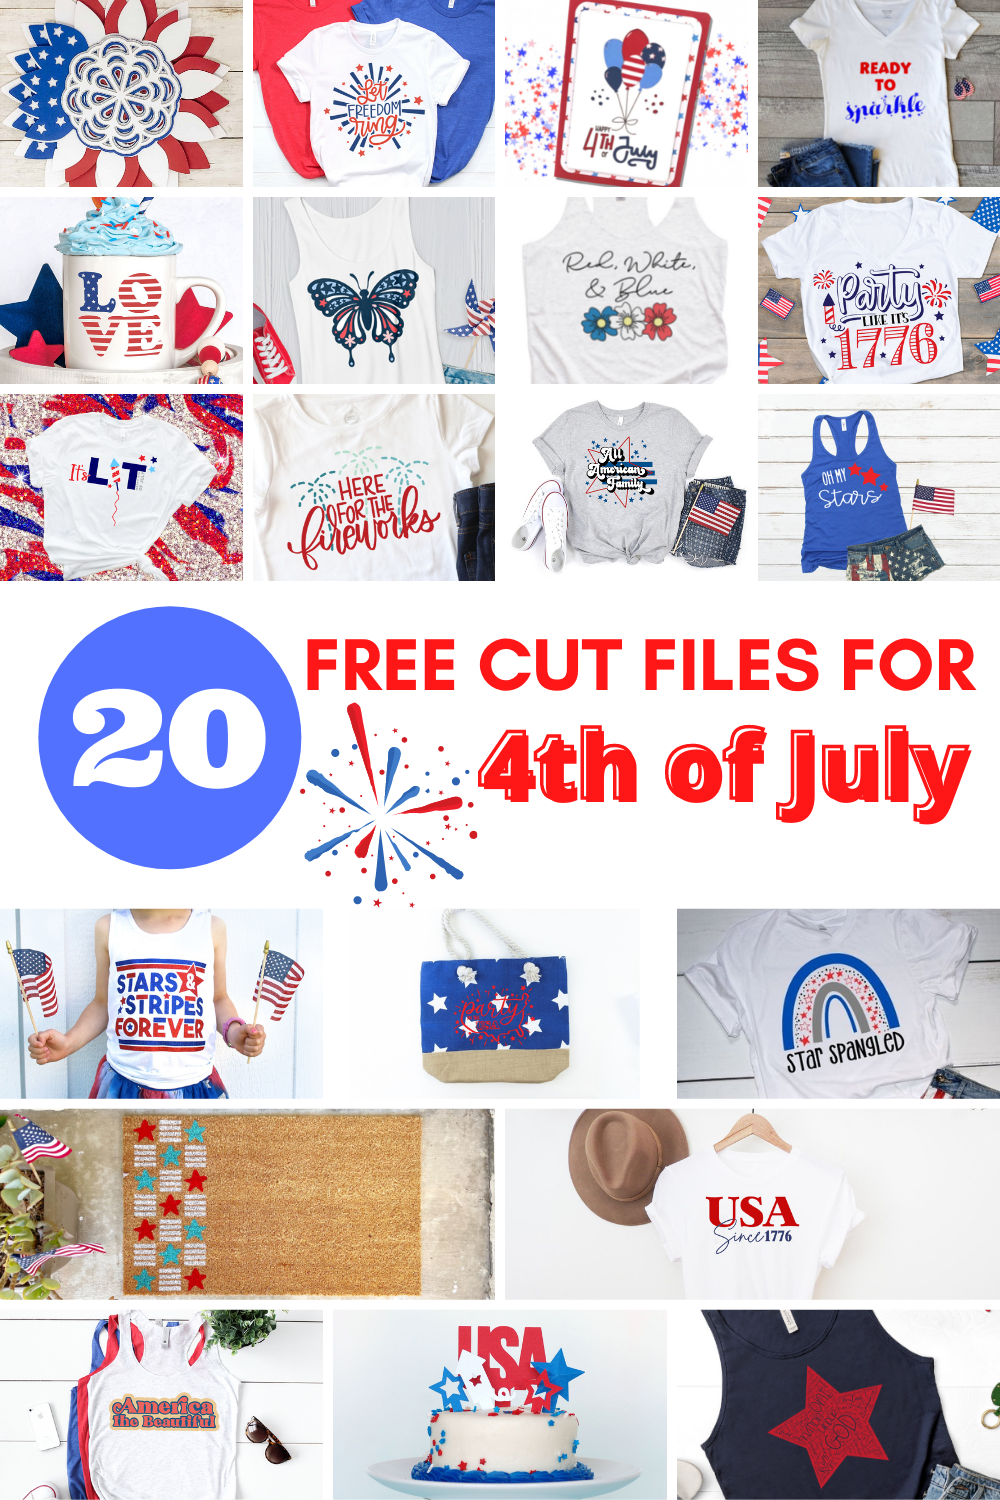 20 free cut files for 4th of July.